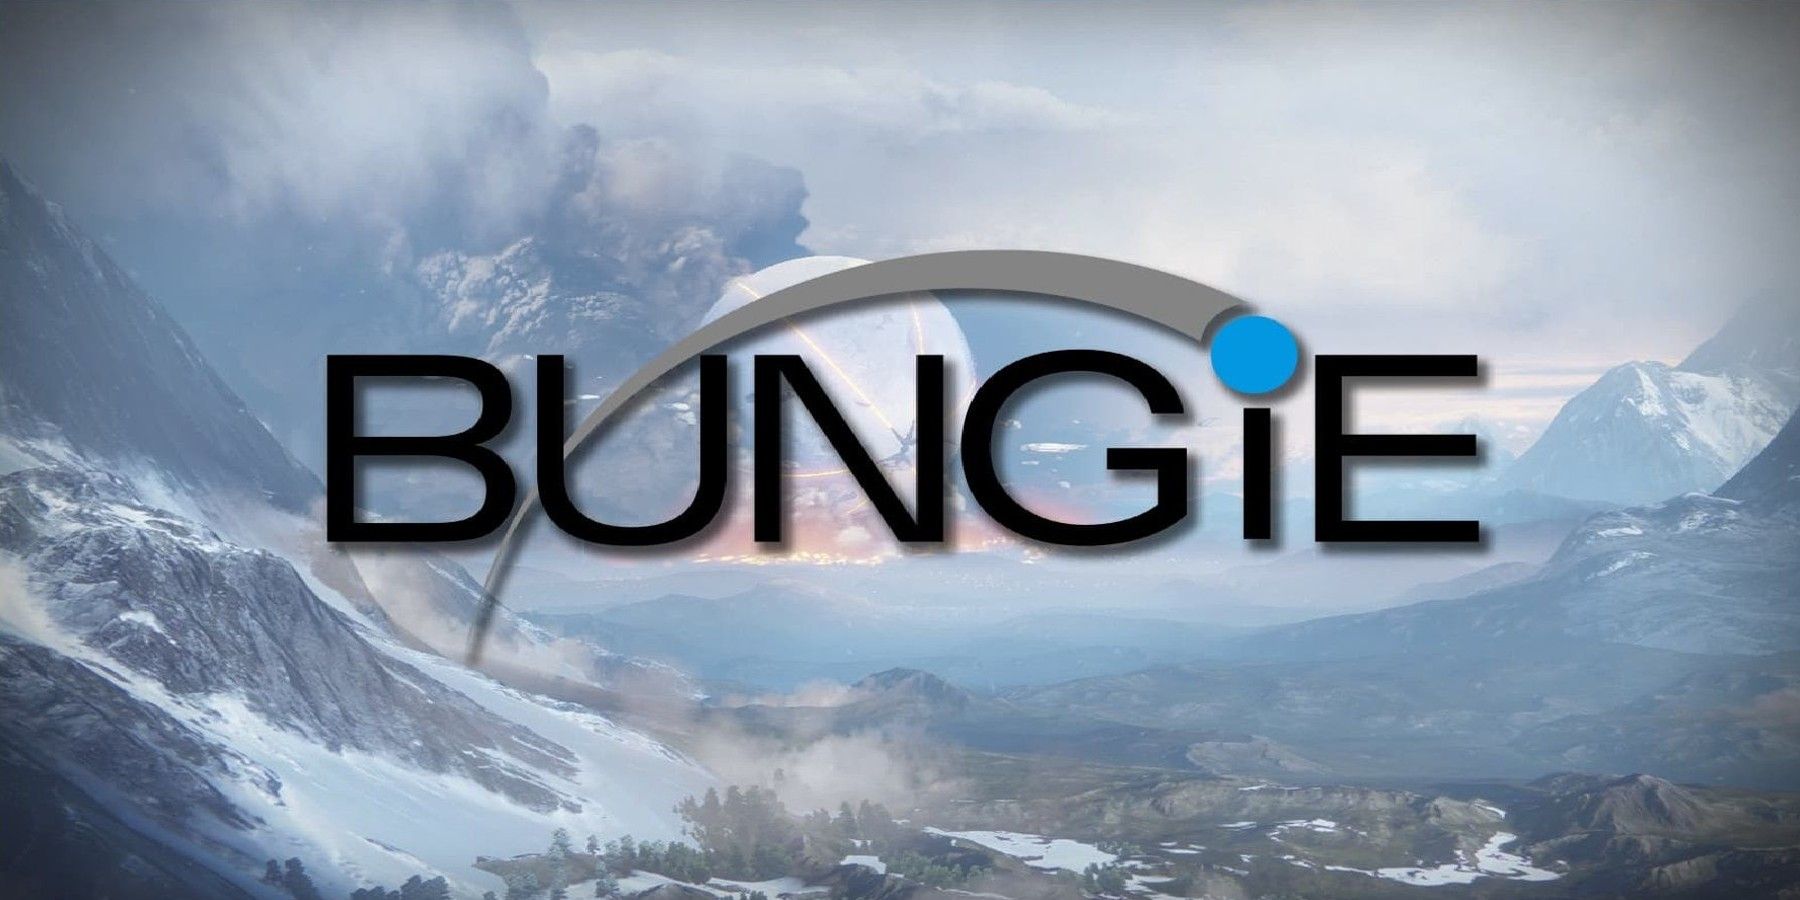 Judge Orders TextNow to Reveal Identities of Users Who Threatened Bungie Employees